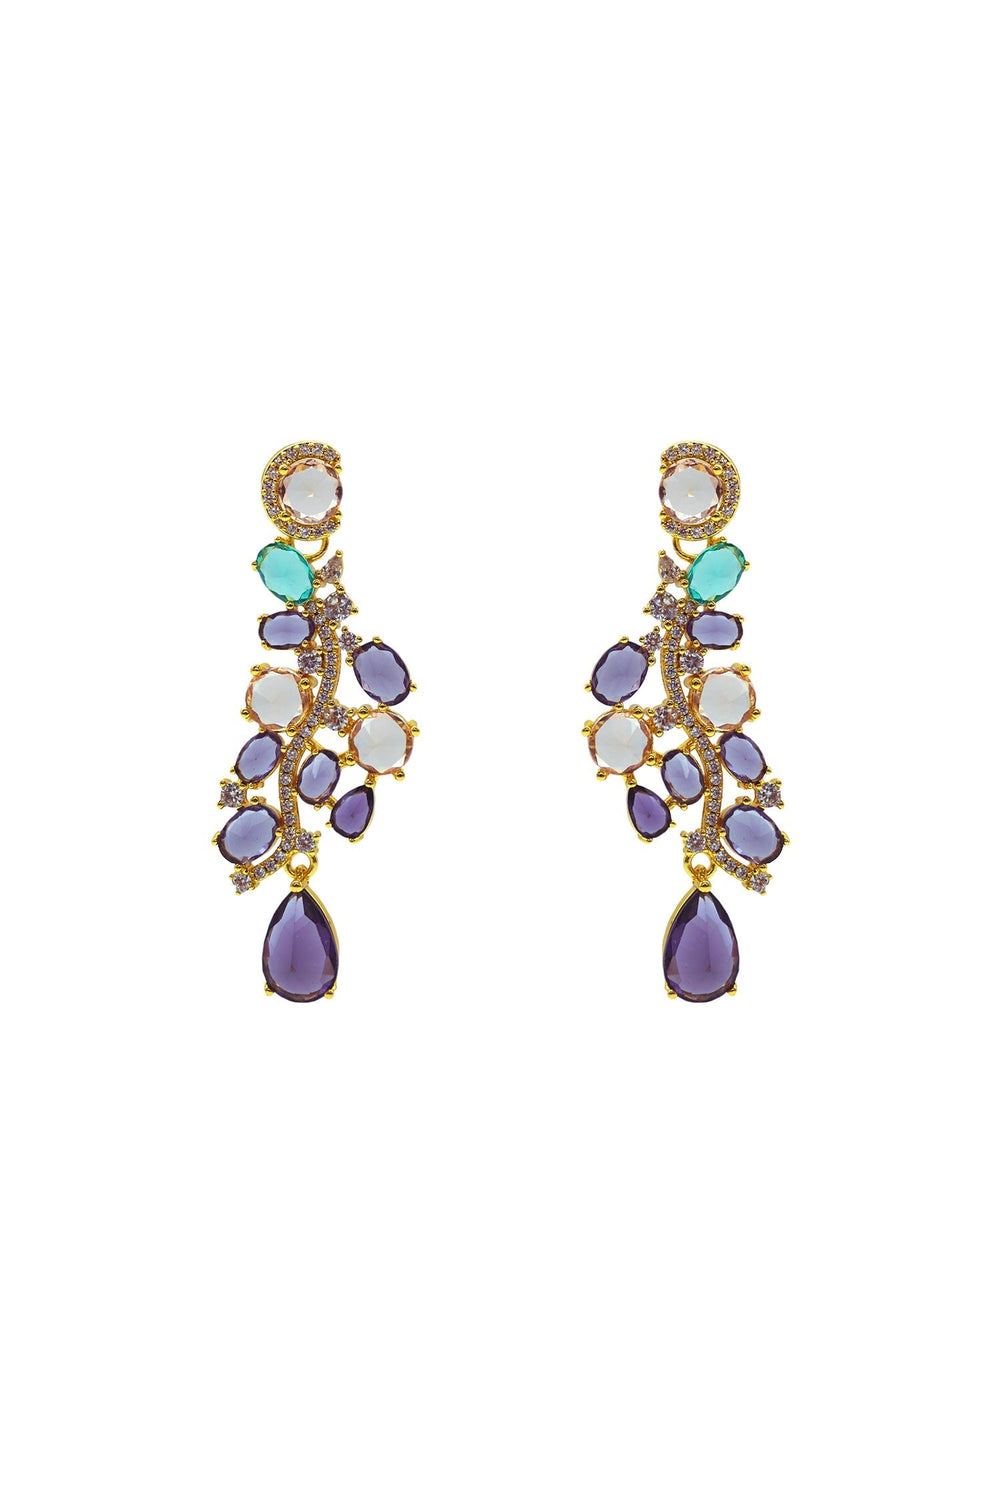 Marcelle Gold Embellished Statement Earrings